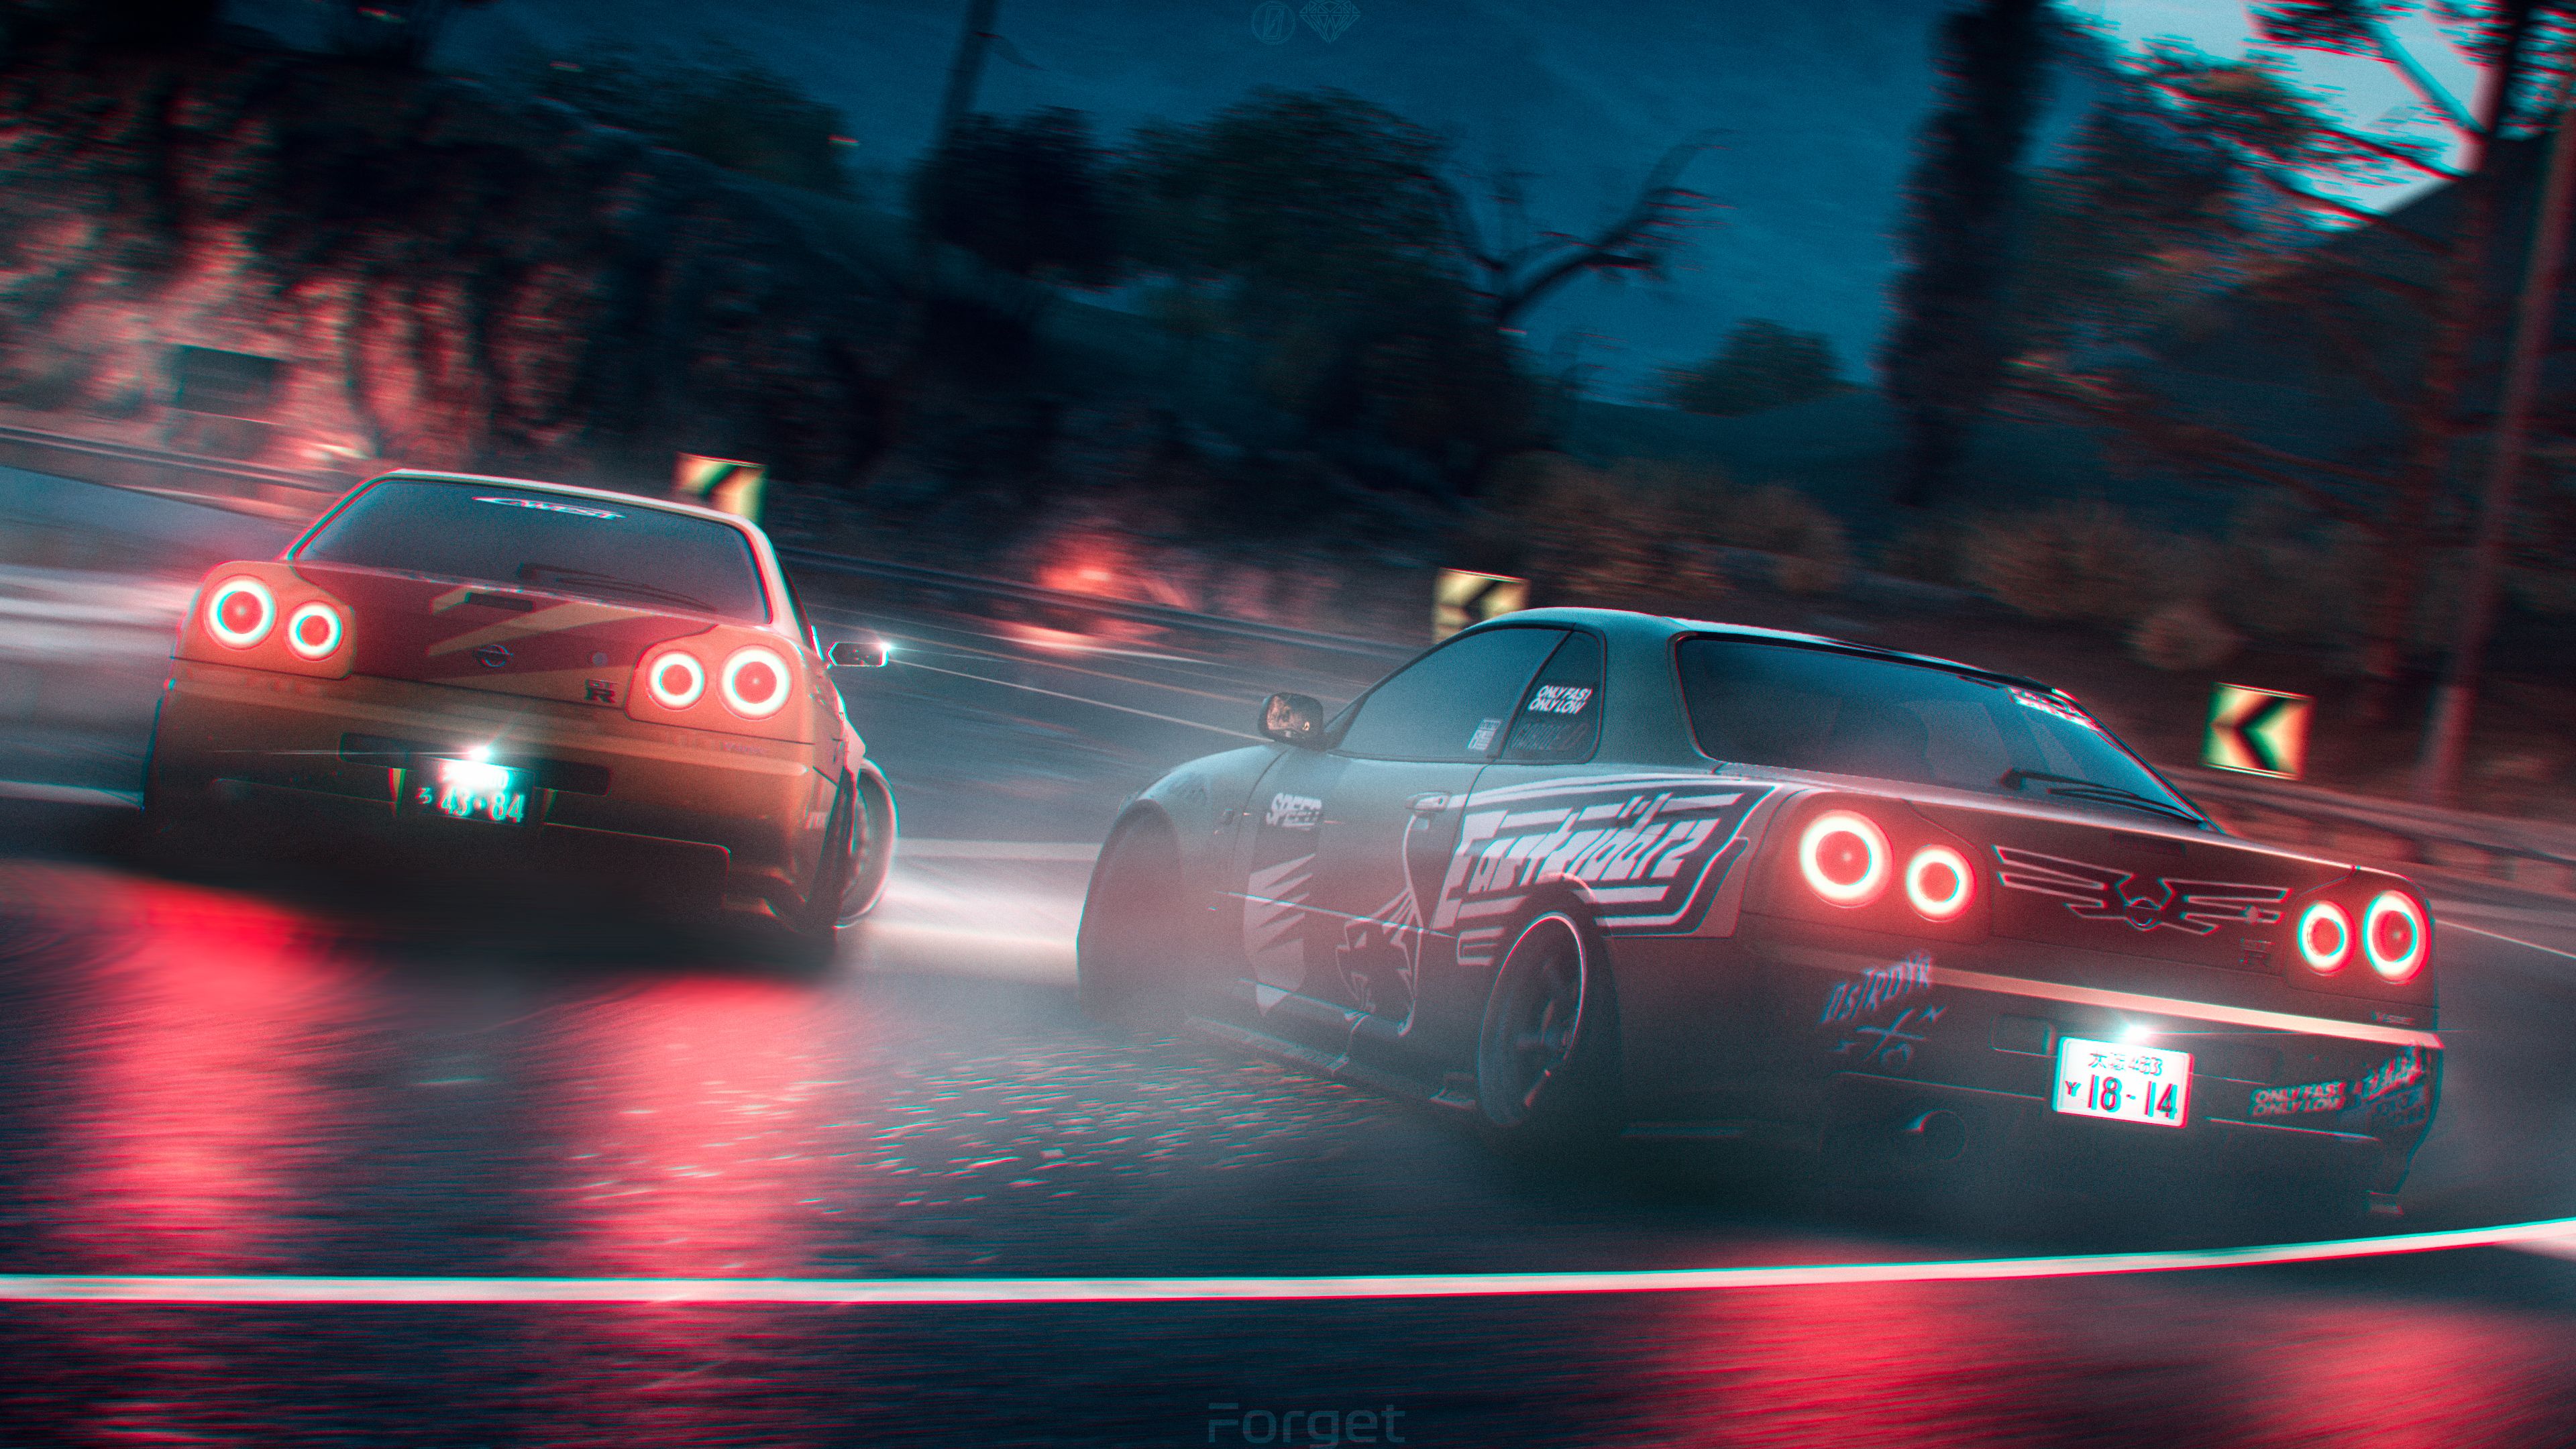 Nissan Skyline GT R Need For Speed X Street Racing Syndicate, HD Games, 4k Wallpaper, Image, Background, Photo and Picture